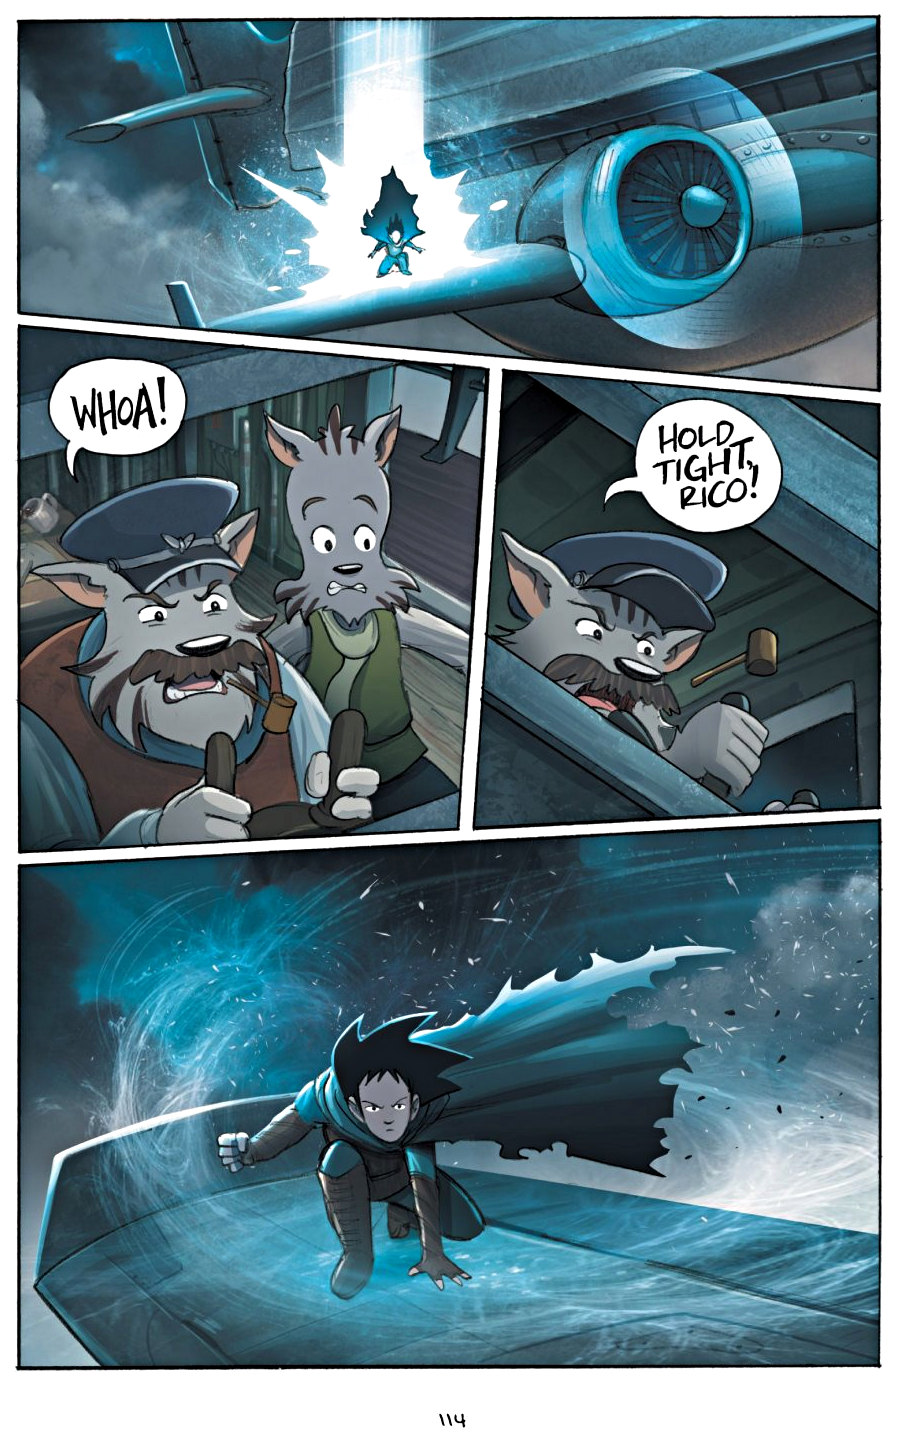 page 114 of amulet 5 prince of the elves graphic novel